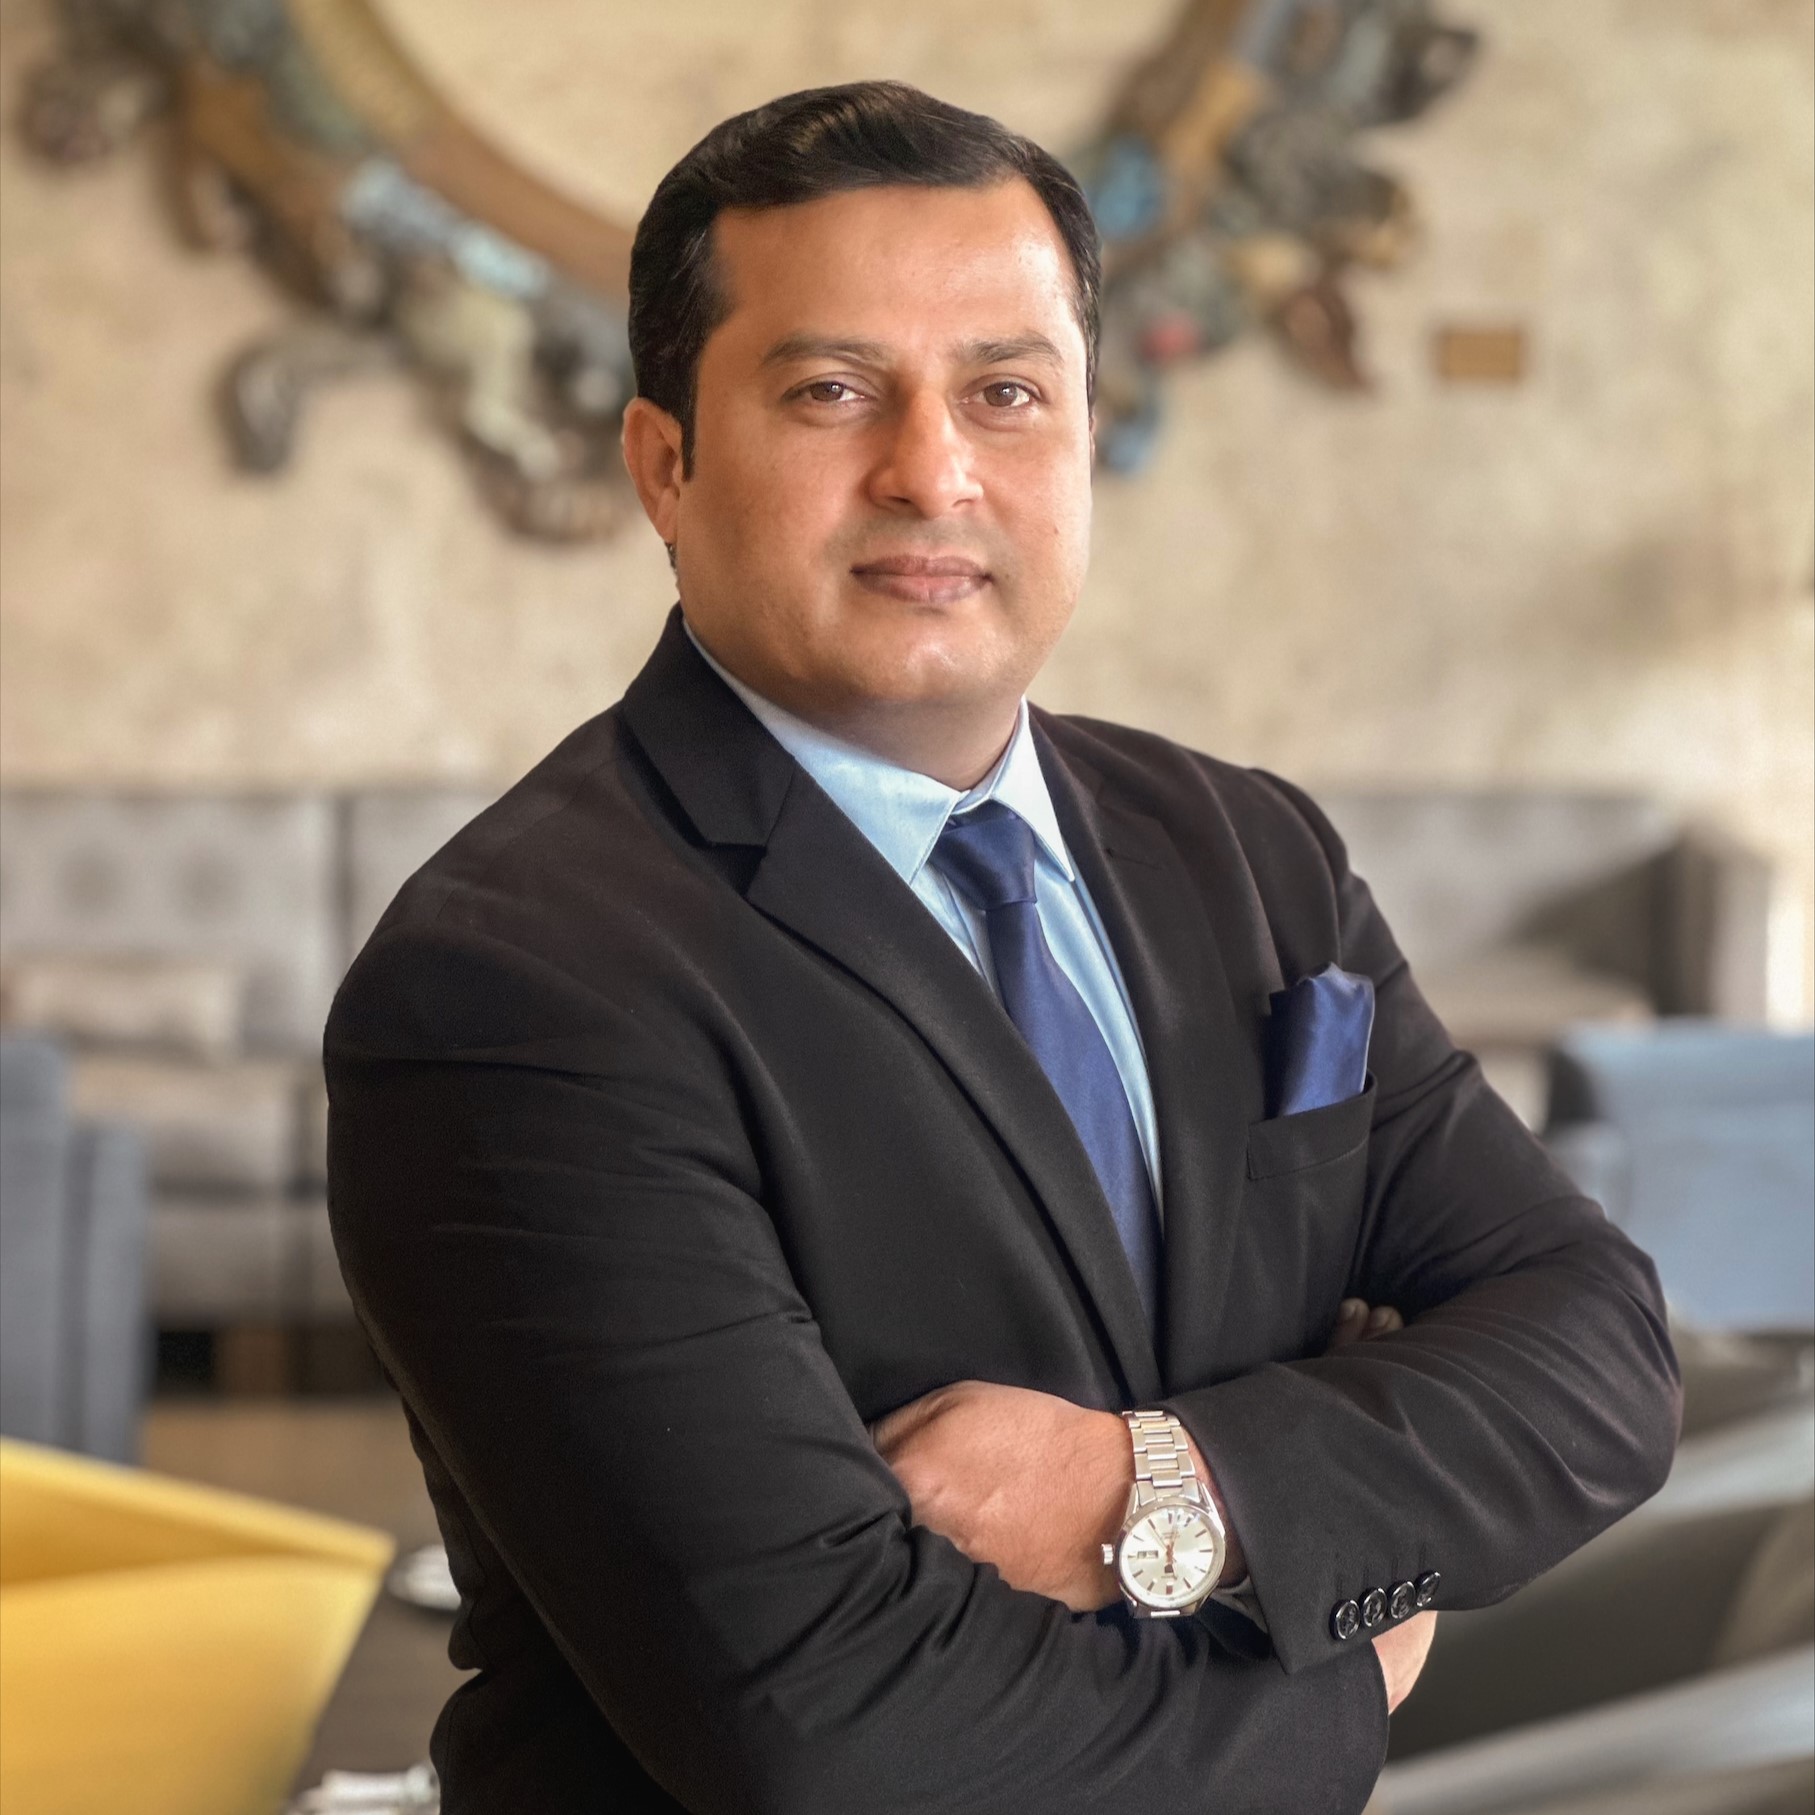 Four Seasons Hotel Bengaluru appoints Syed Tauseef Ahmed as Director of Catering